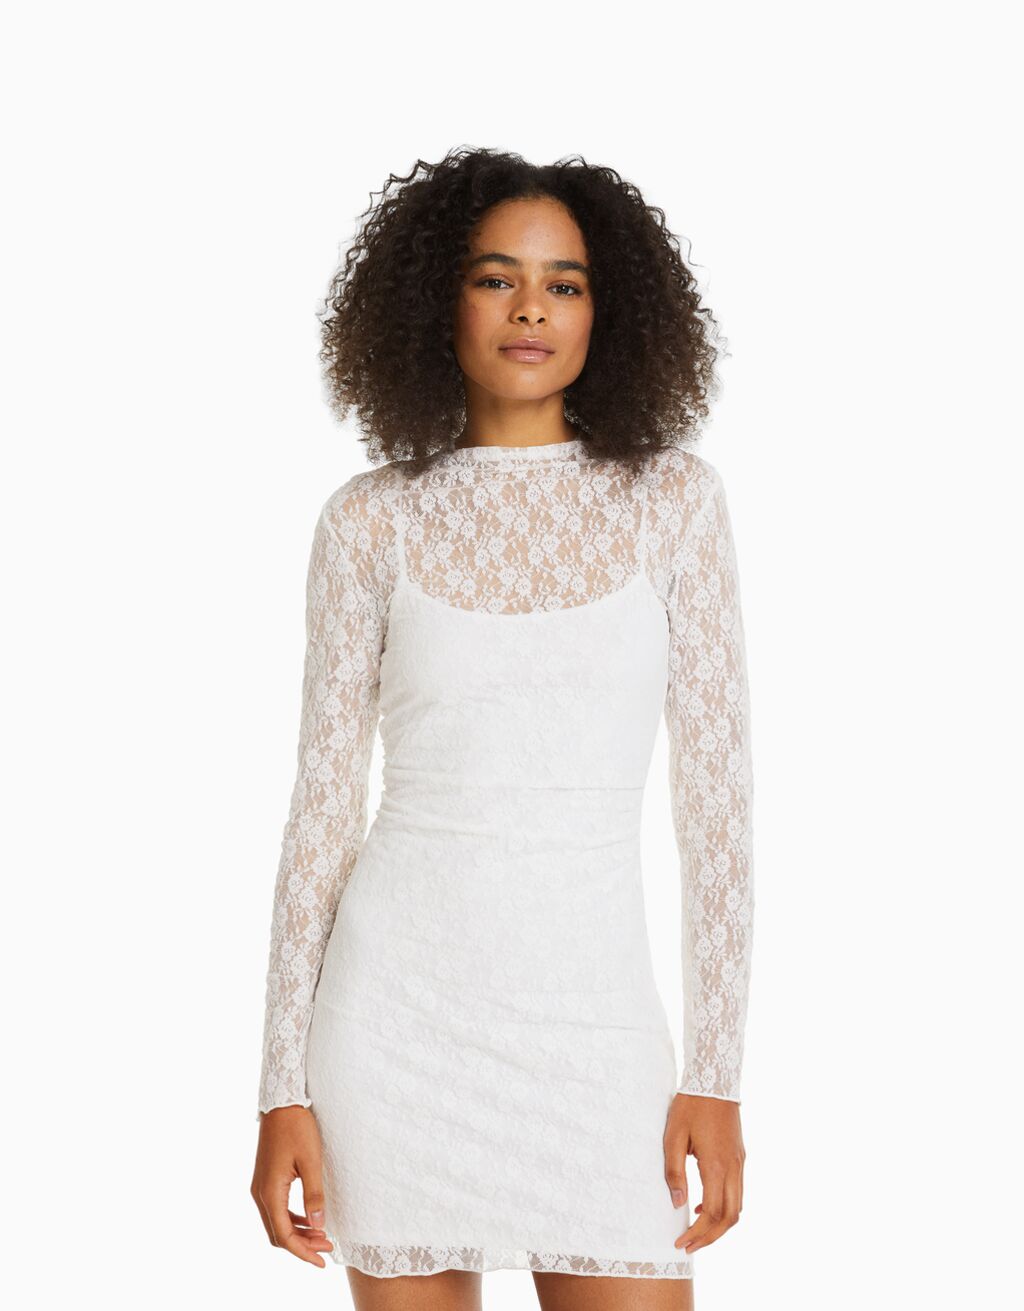 Blond lace long sleeve mini dress with neckline detail